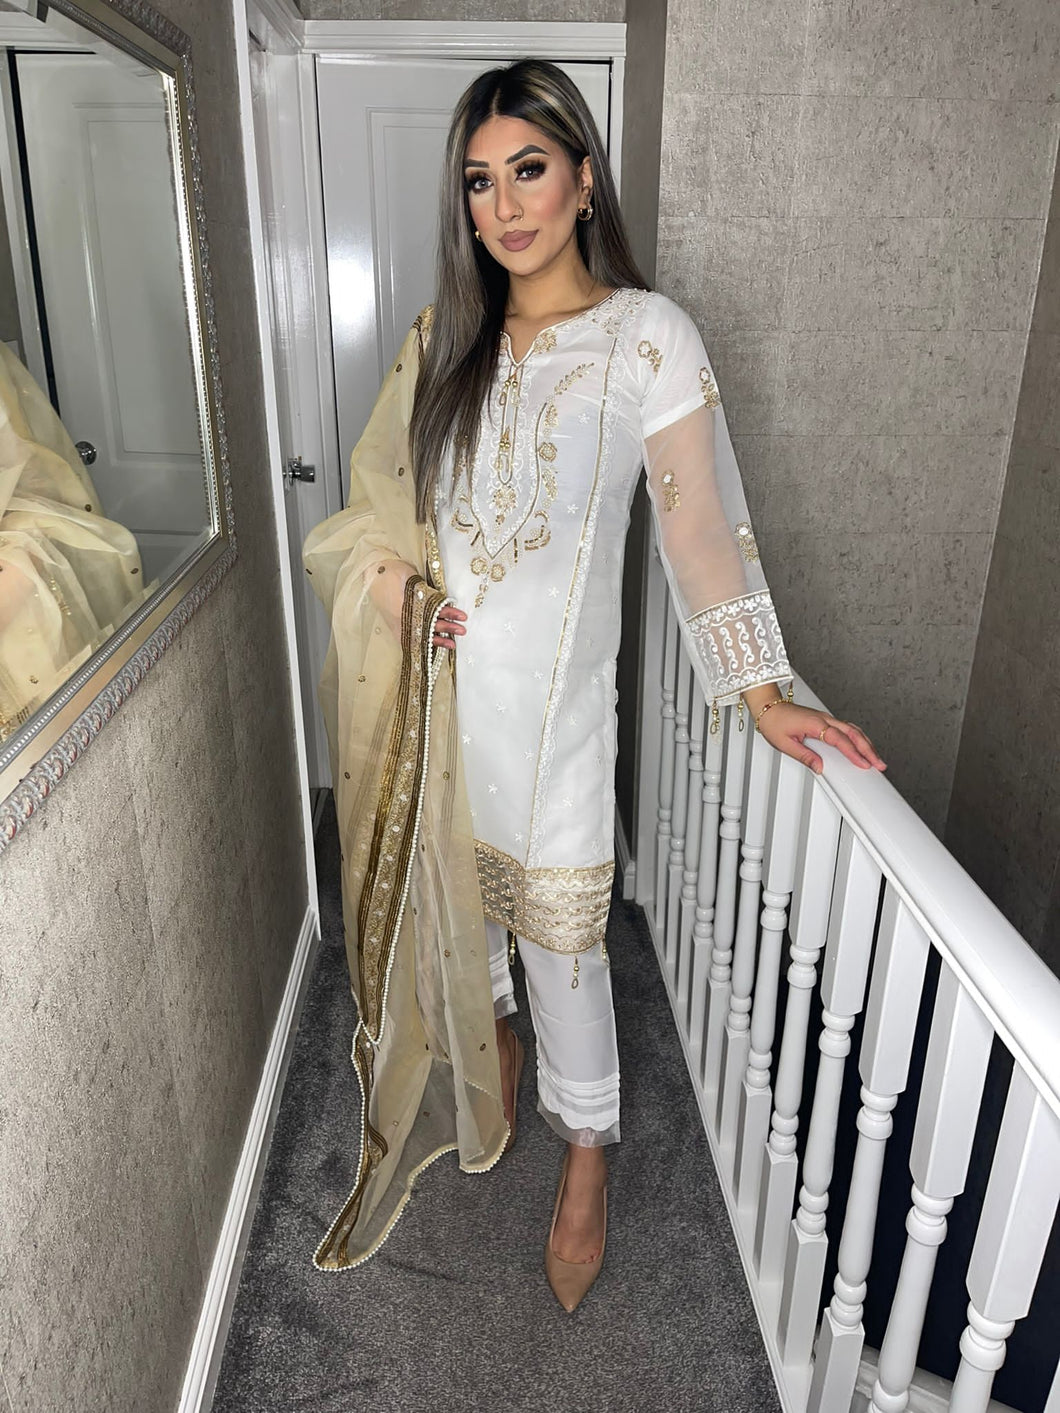 3pc White net with Gold Embroidery Shalwar Kameez with Gold Organza Dupatta Ready to wear suit HW-WHITEGOLD